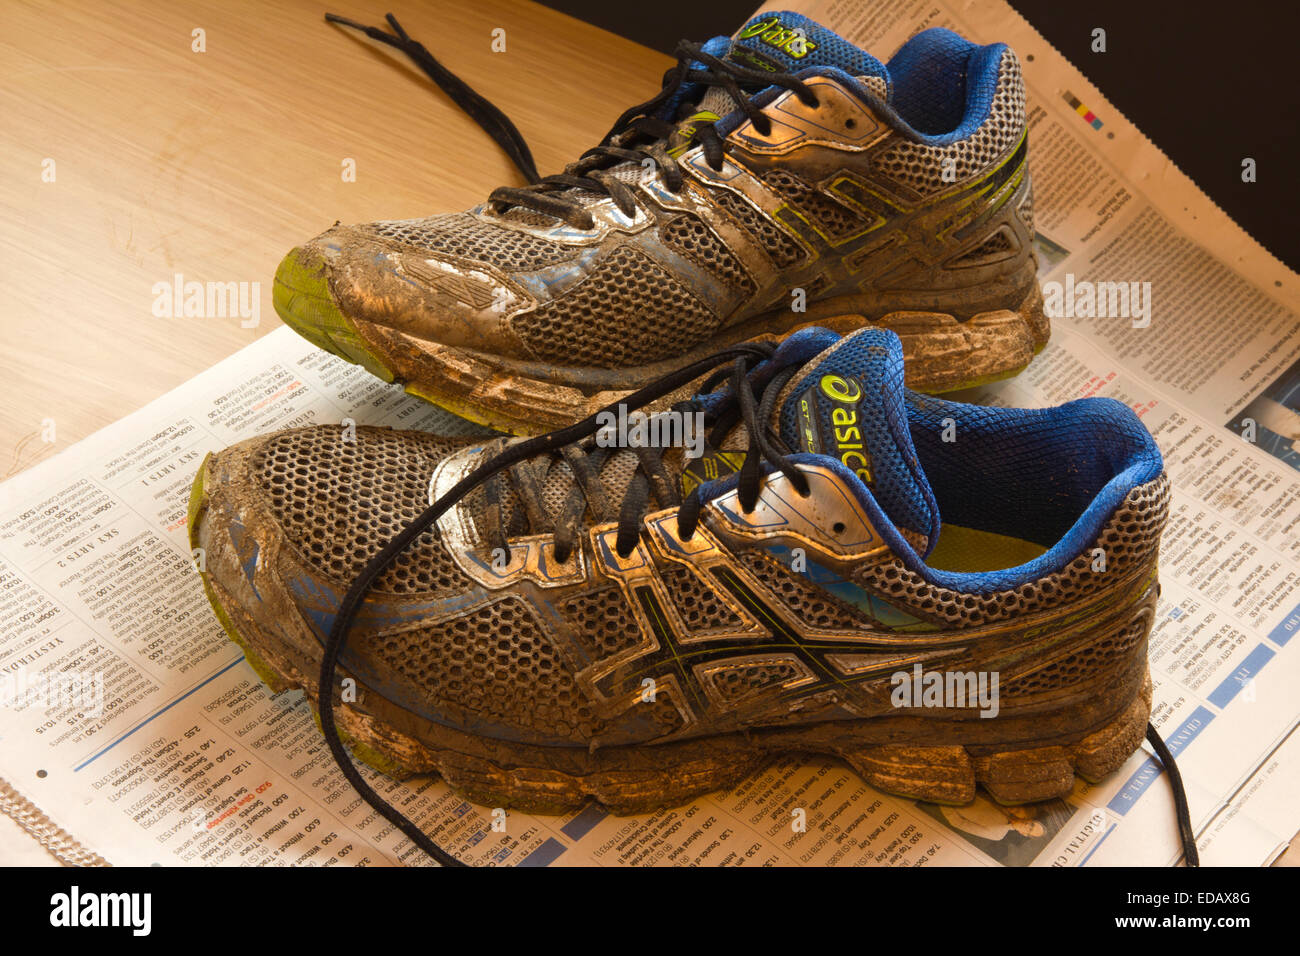 Dity Muddy Trainers on newspaper protecting the floor Stock Photo